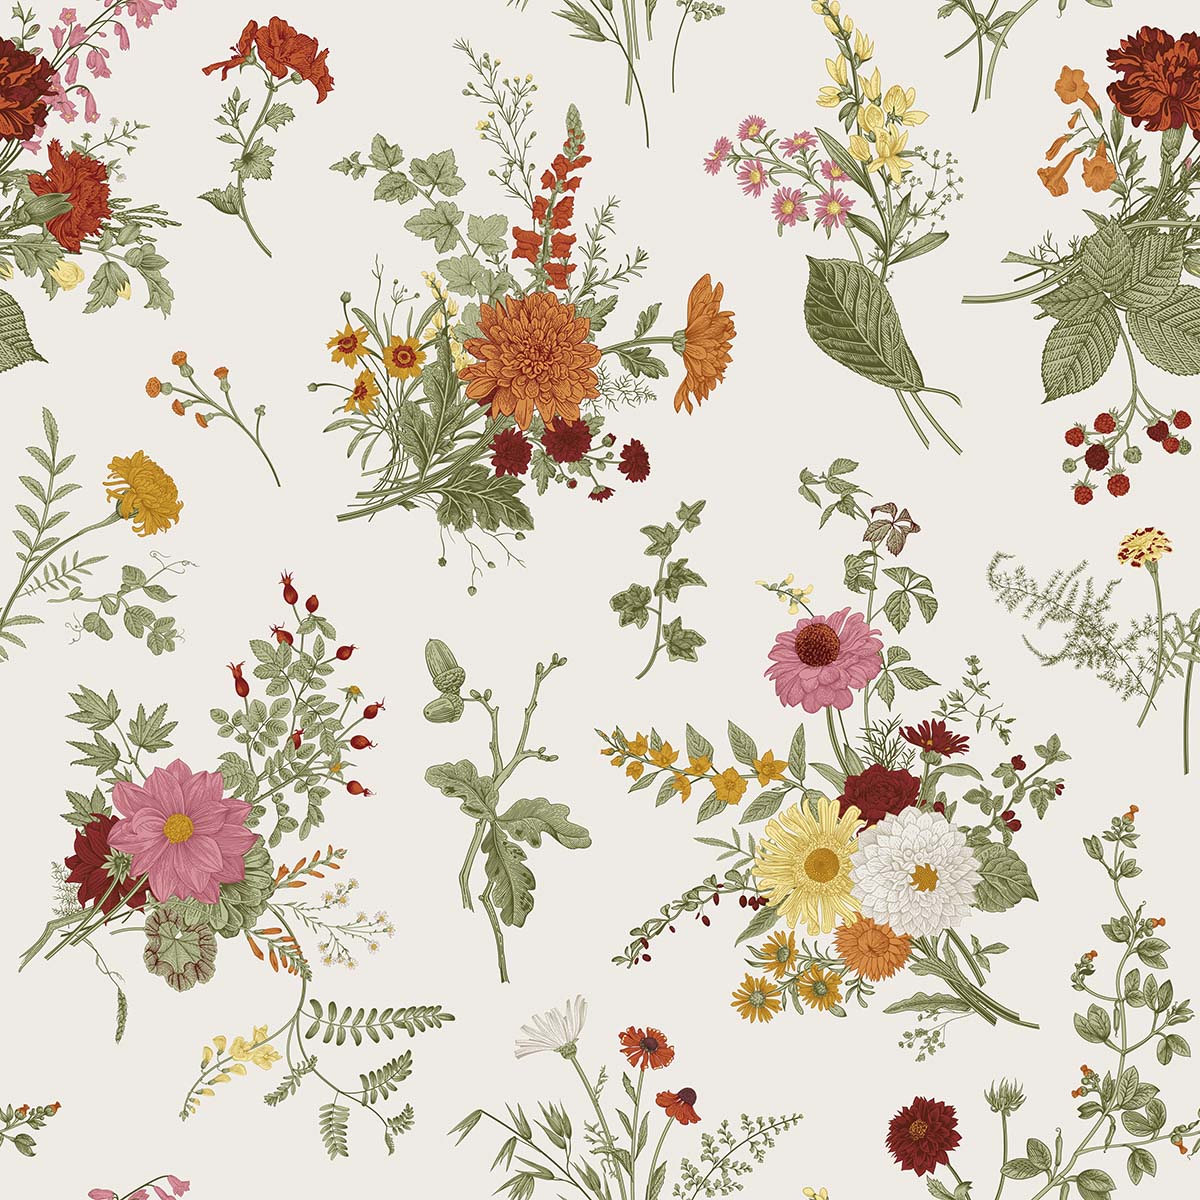 A pattern of flowers on a white background